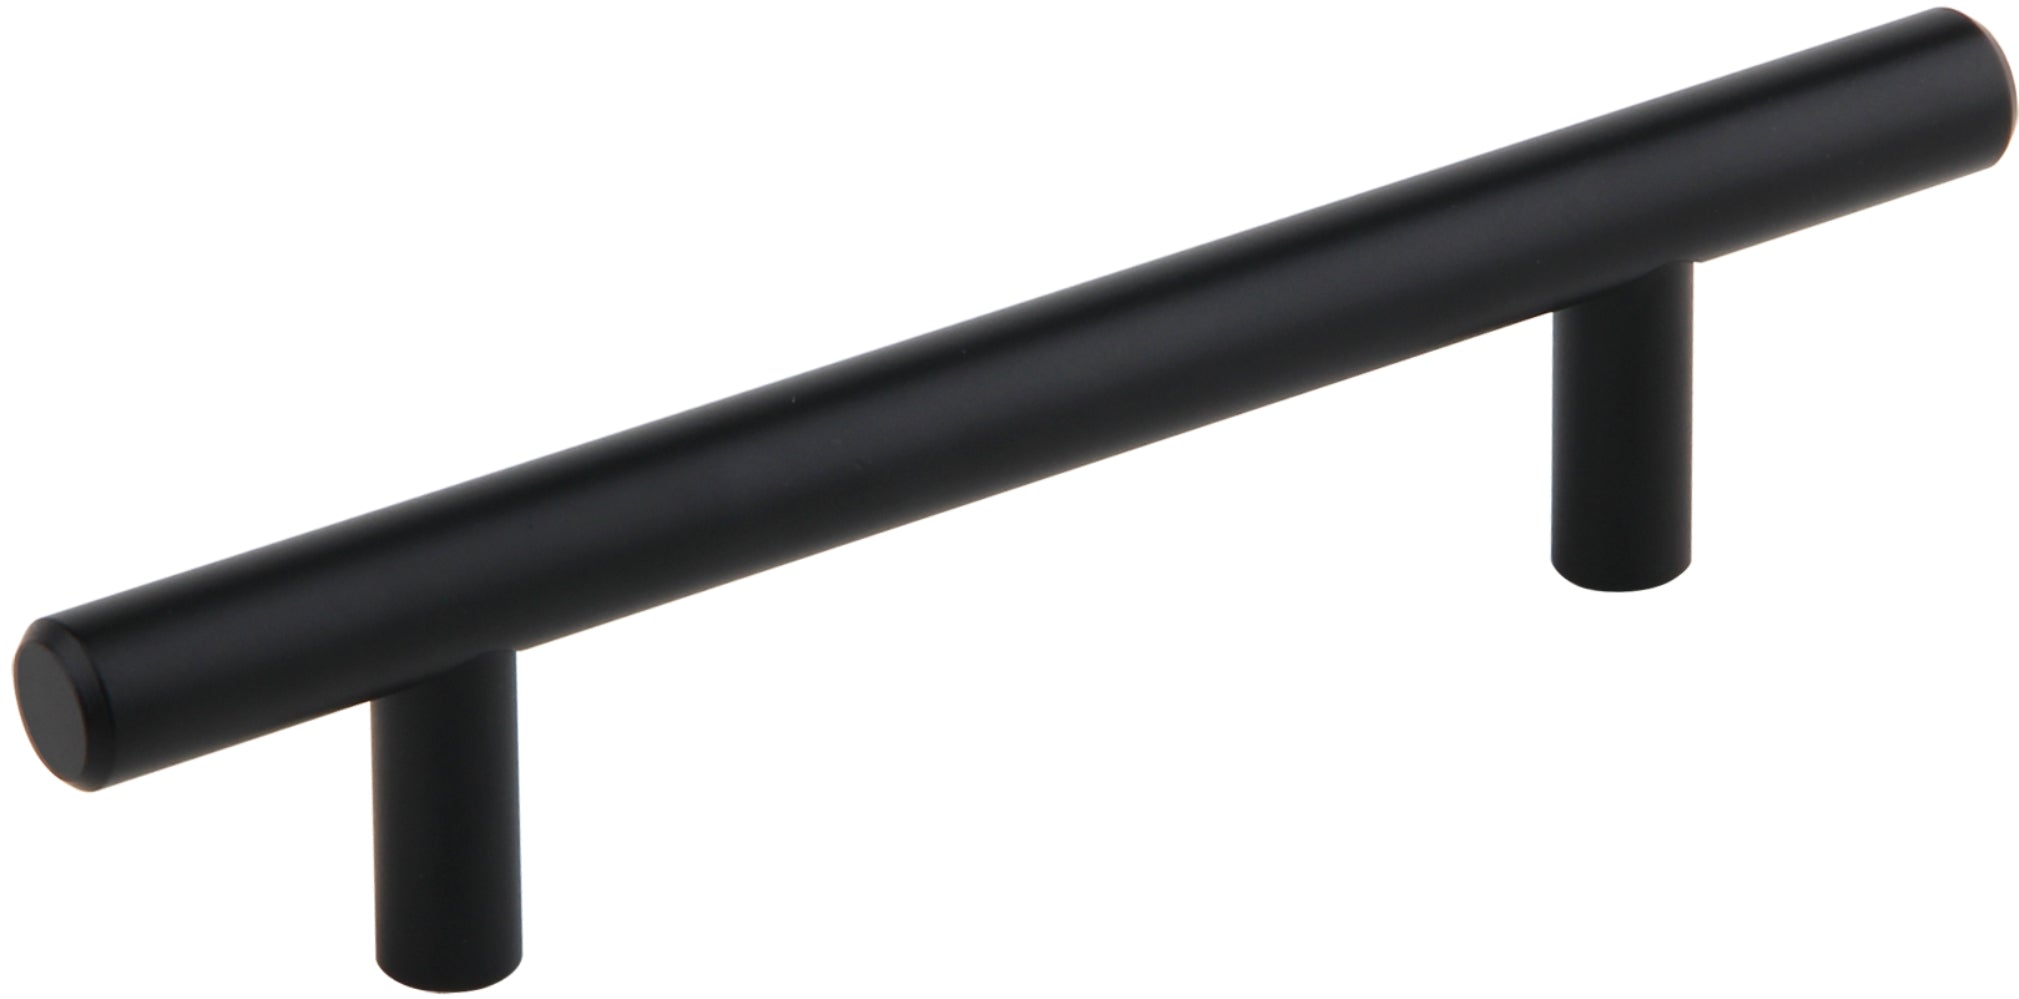 Silverline P5000s - Solid Steel and Hollow Stainless Steel T Bar Pull Cabinet Appliance Handle Various Sizes in Matte Black Finish